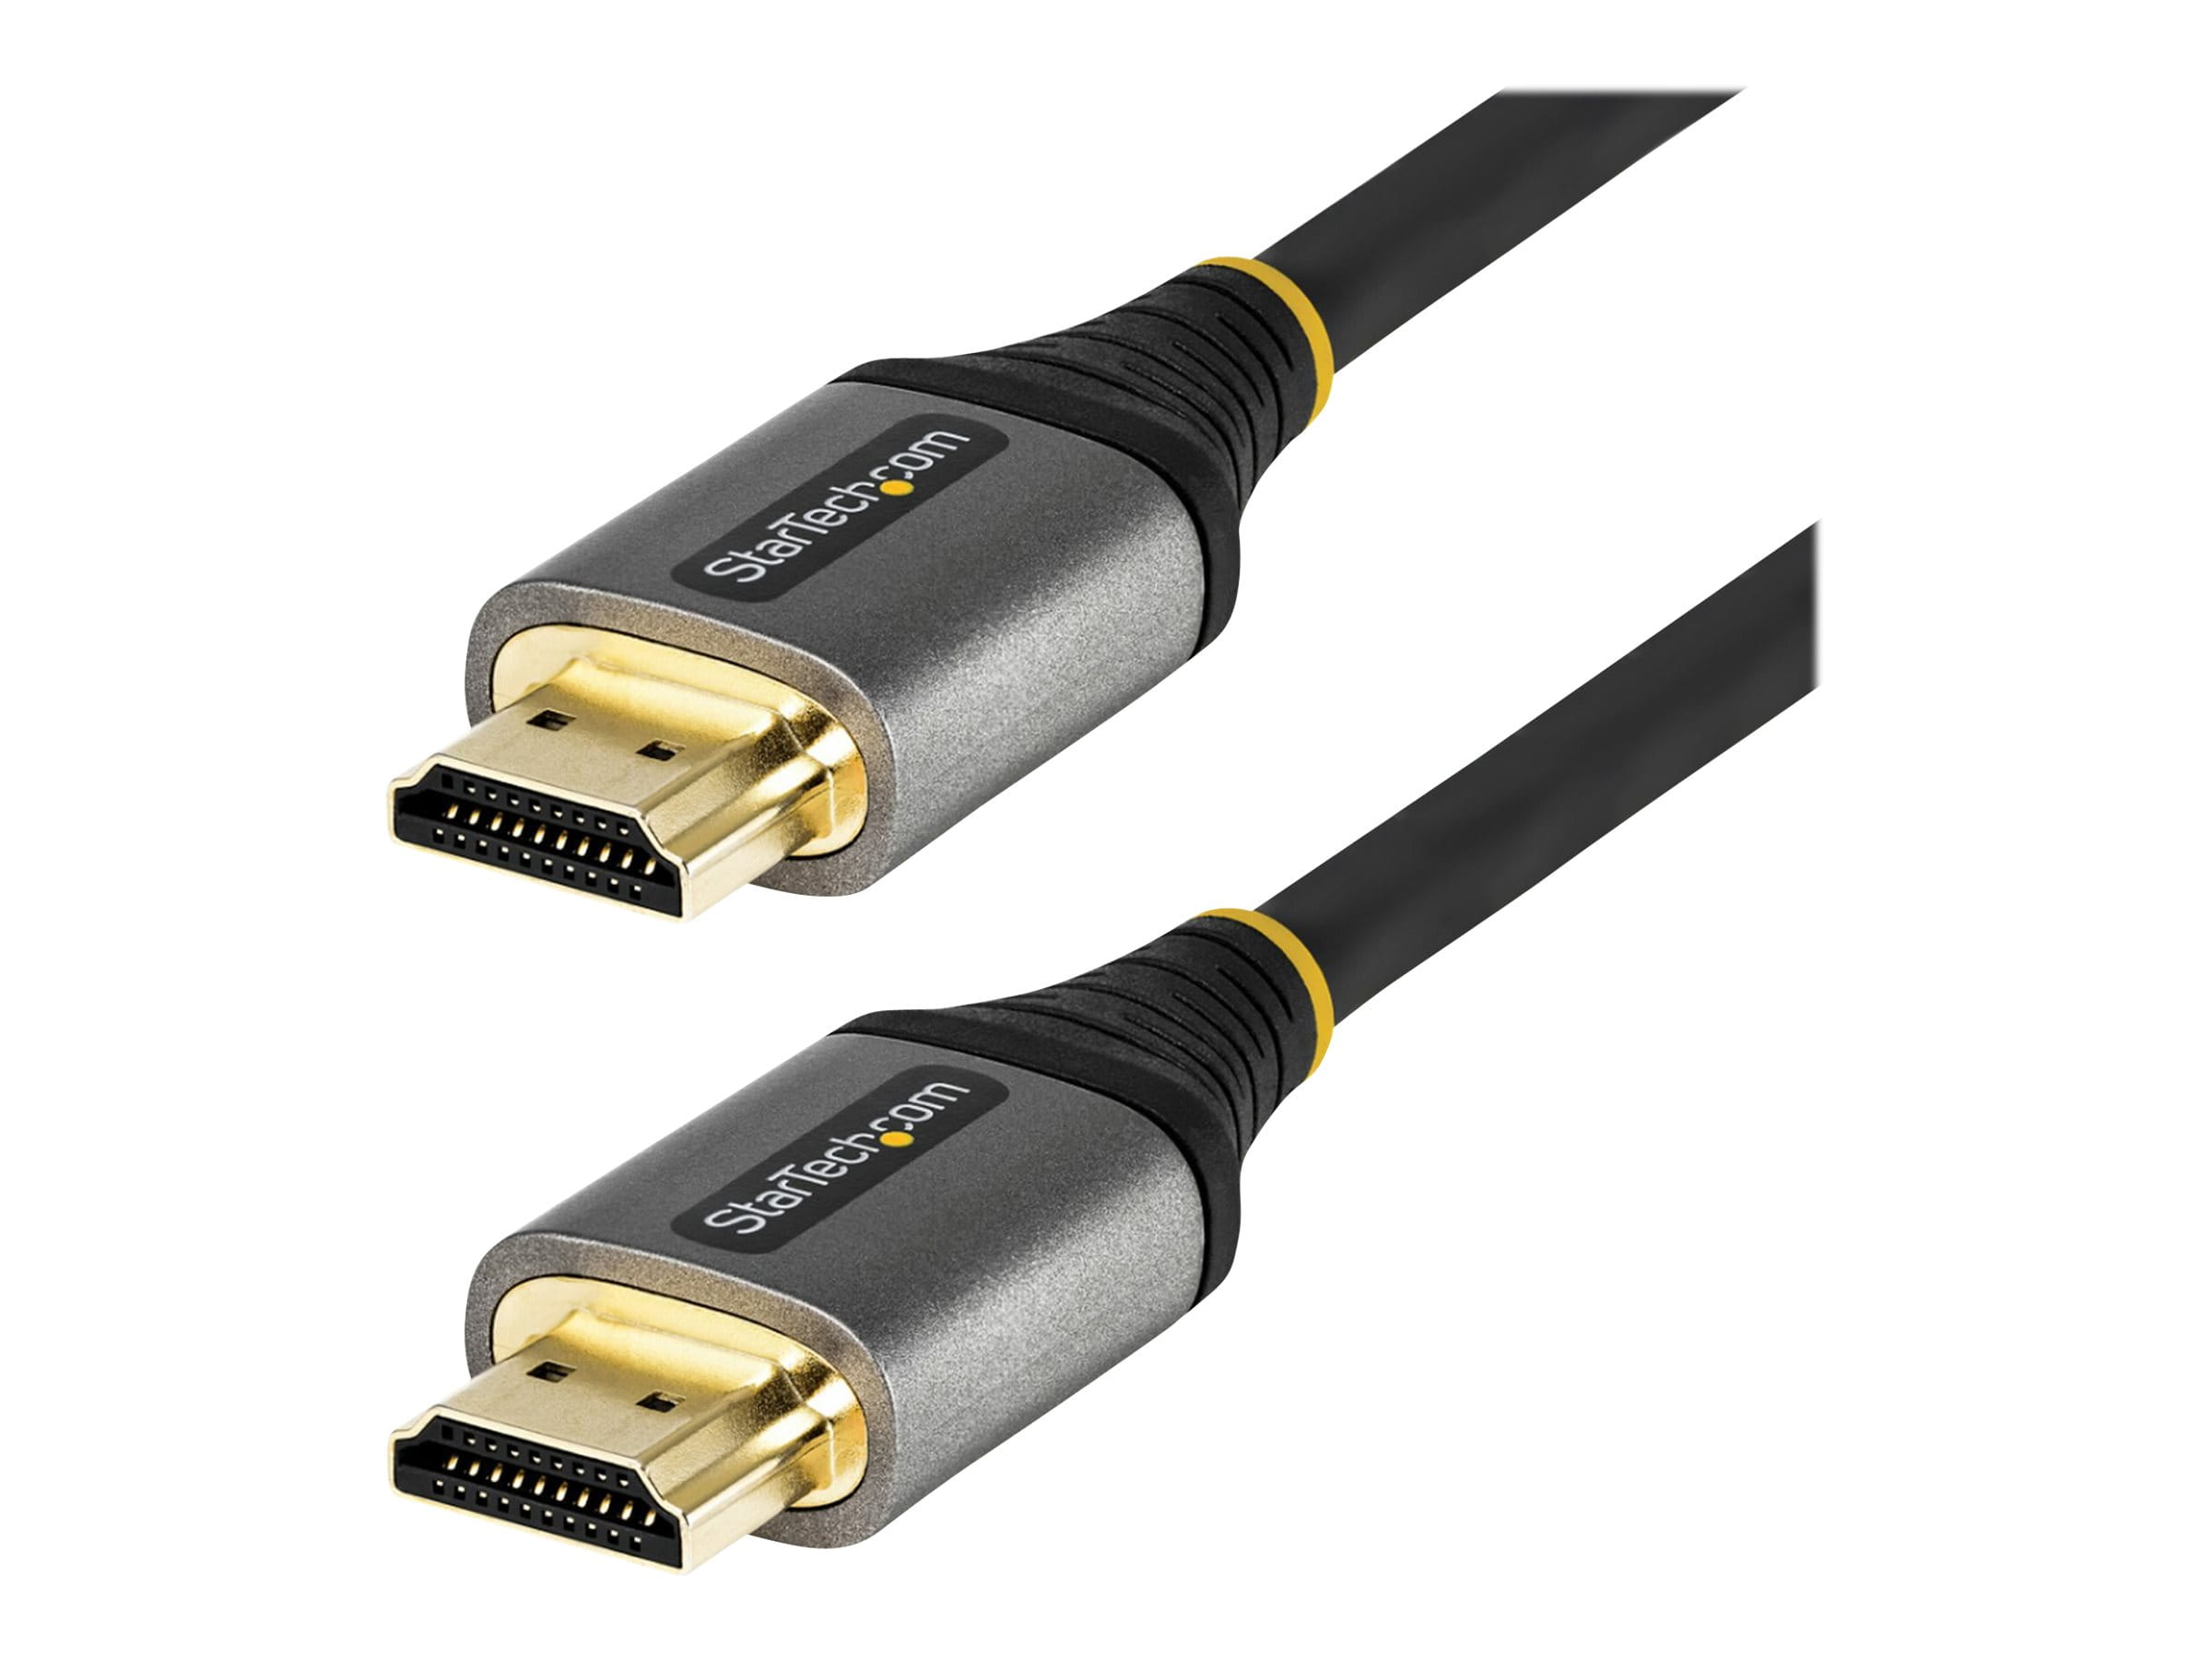 StarTech.com 13ft (4m) Premium Certified HDMI 2.0 Cable - High-Speed Ultra HD 4K 60Hz HDMI Cable with Ethernet - HDR10, ARC - UHD HDMI Video Cord - For UHD Monitors, TVs, Displays - M/M - Premium Highspeed - HDMI-Kabel mit Ethernet - HDMI männlich zu HD